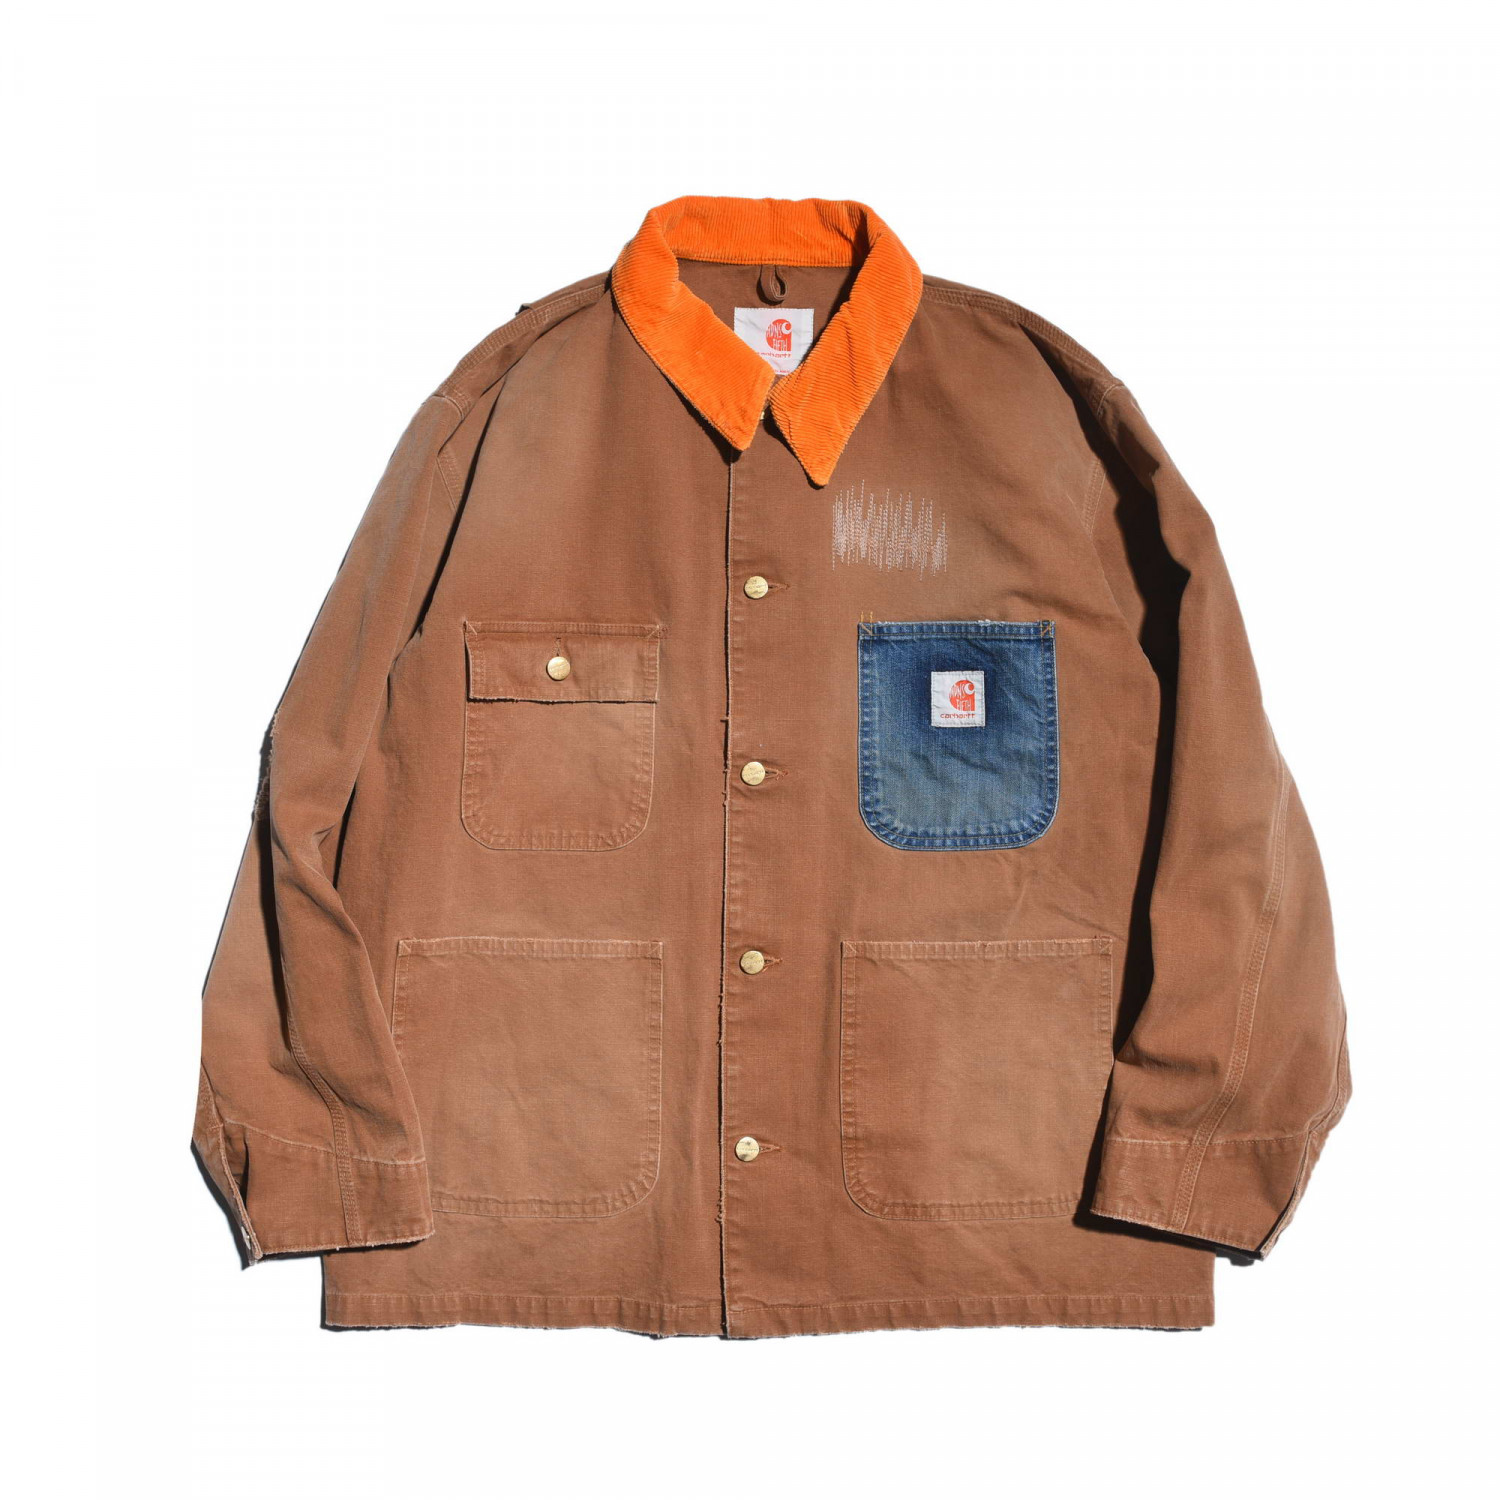 MADNESS x CARHARTT WIP FIFTH RECONSTRUCTED MICHIGAN COAT | MADNESS